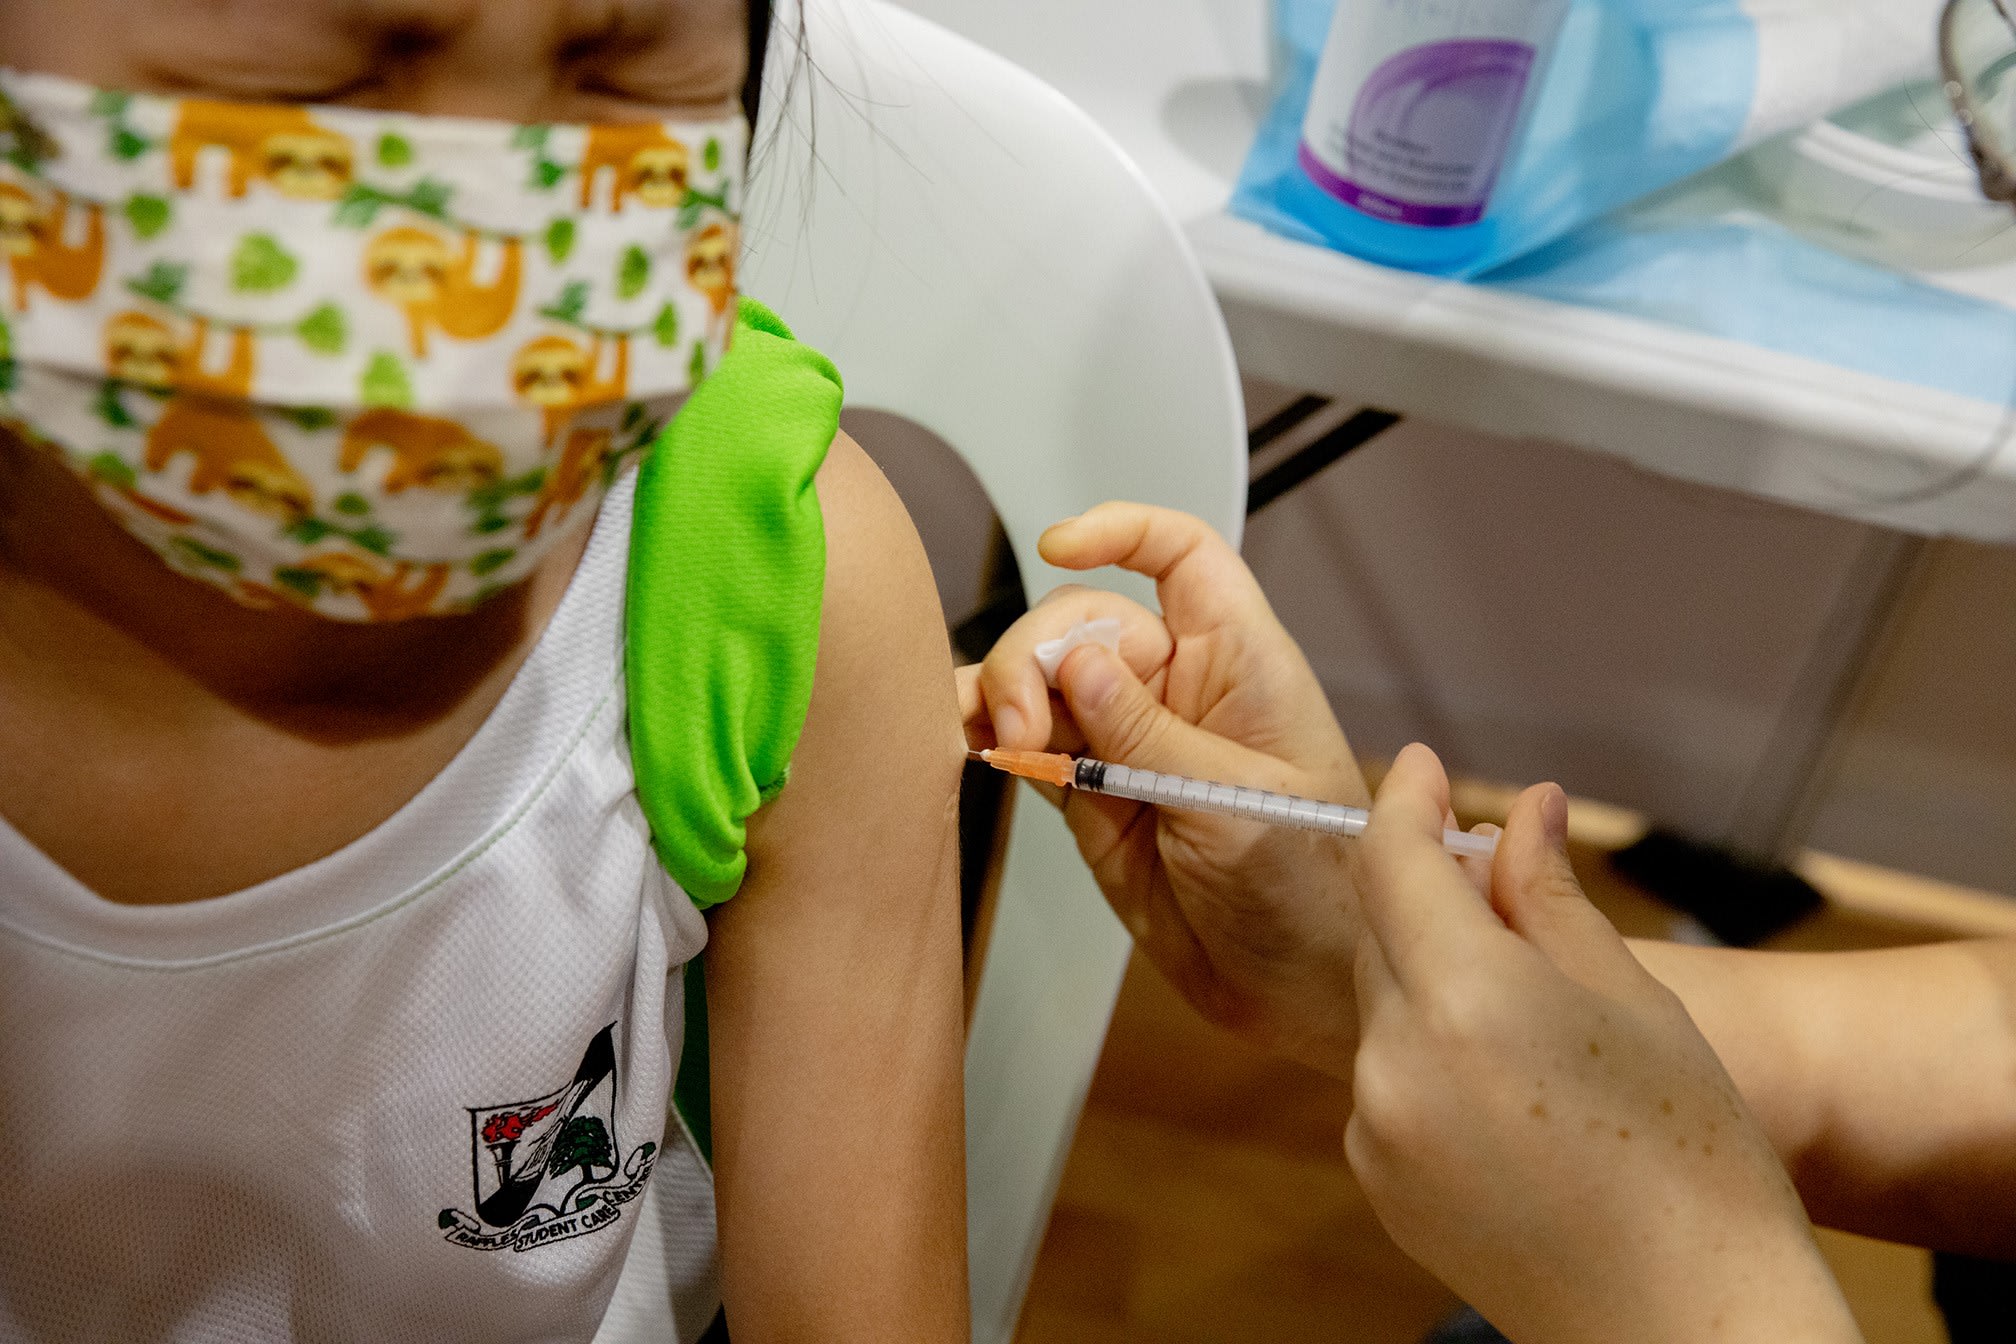 Singapore started vaccinating children aged five to 11 in December 2021.